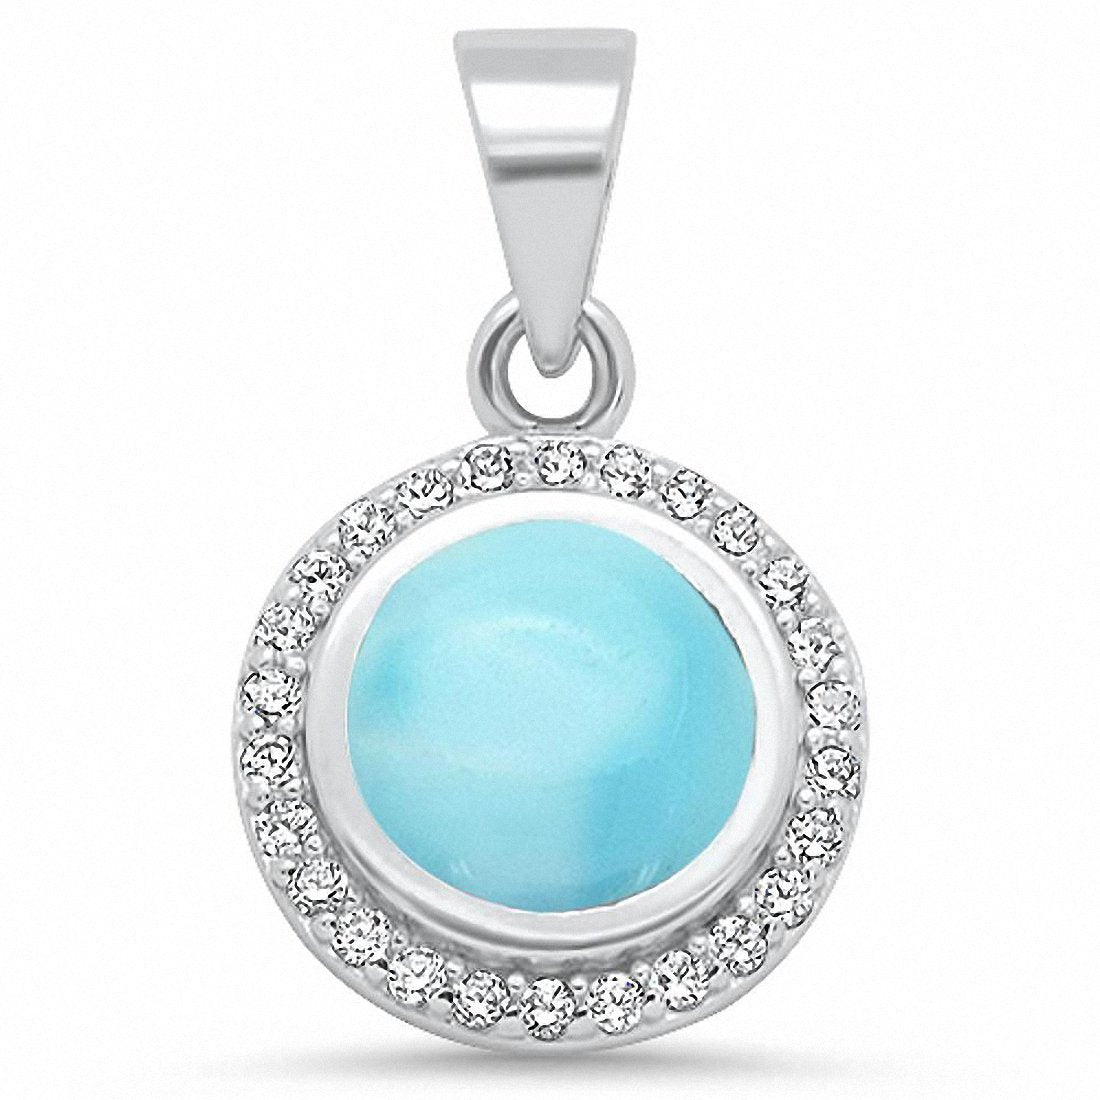 Halo Round Pendant Bezel Lab Created Opal 925 Sterling Silver